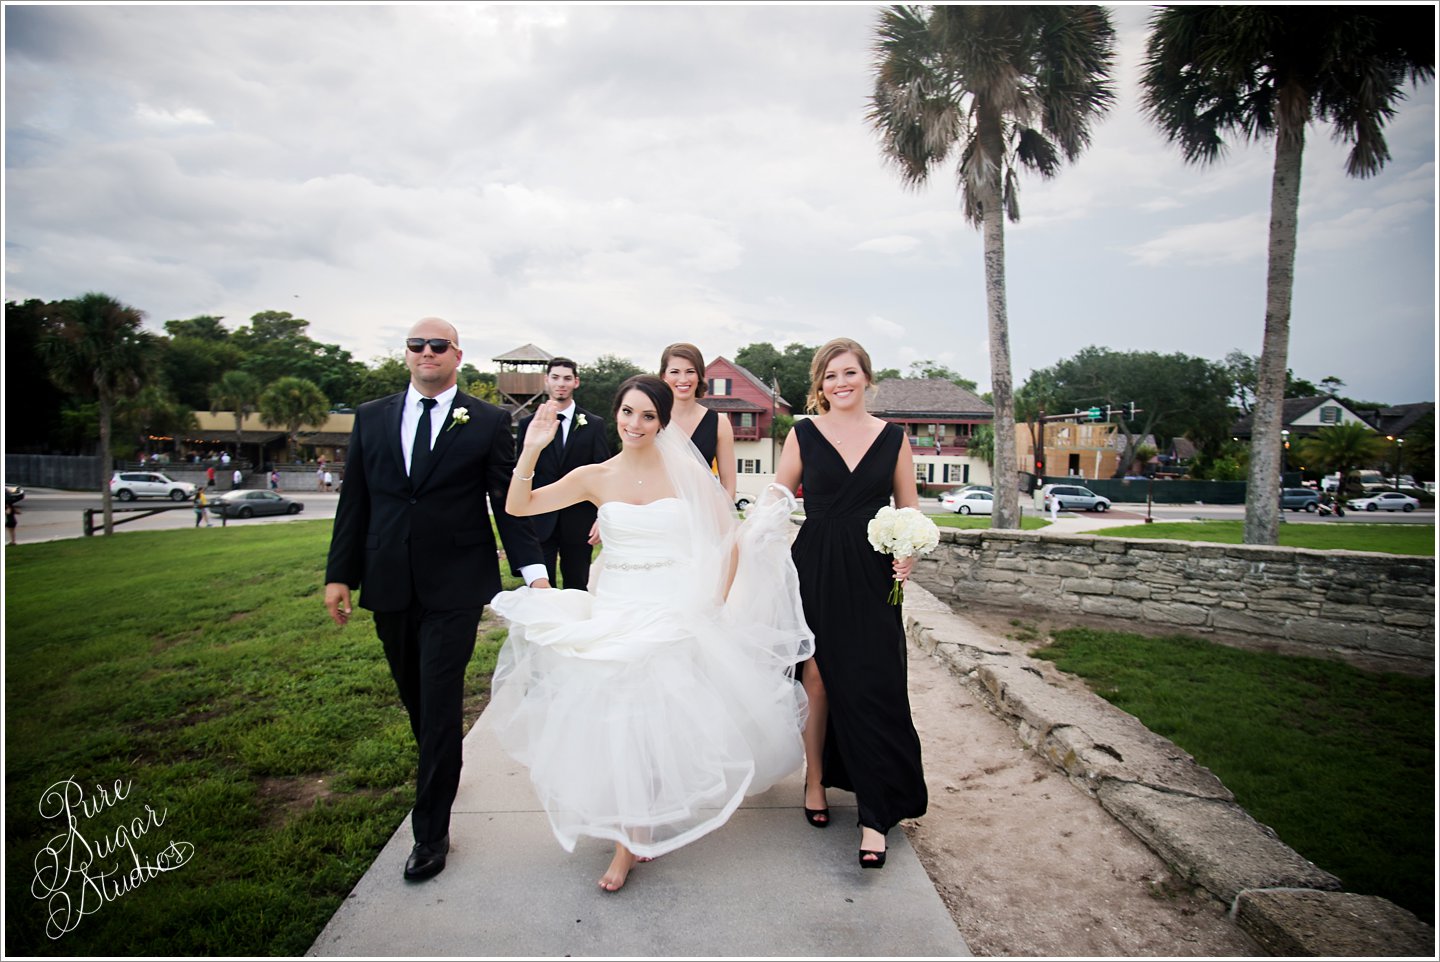 Eli Meyer,Executive Food Service,Monique Lhuillier,Not Too Shabby Bakery,Pure Sugar Studios,St. Augustine Wedding Photographer,Stephanie Bolen,The Rivertwon band,Treasury,Treasury on the Plaza,evrything with plants and flowers,formals,v,